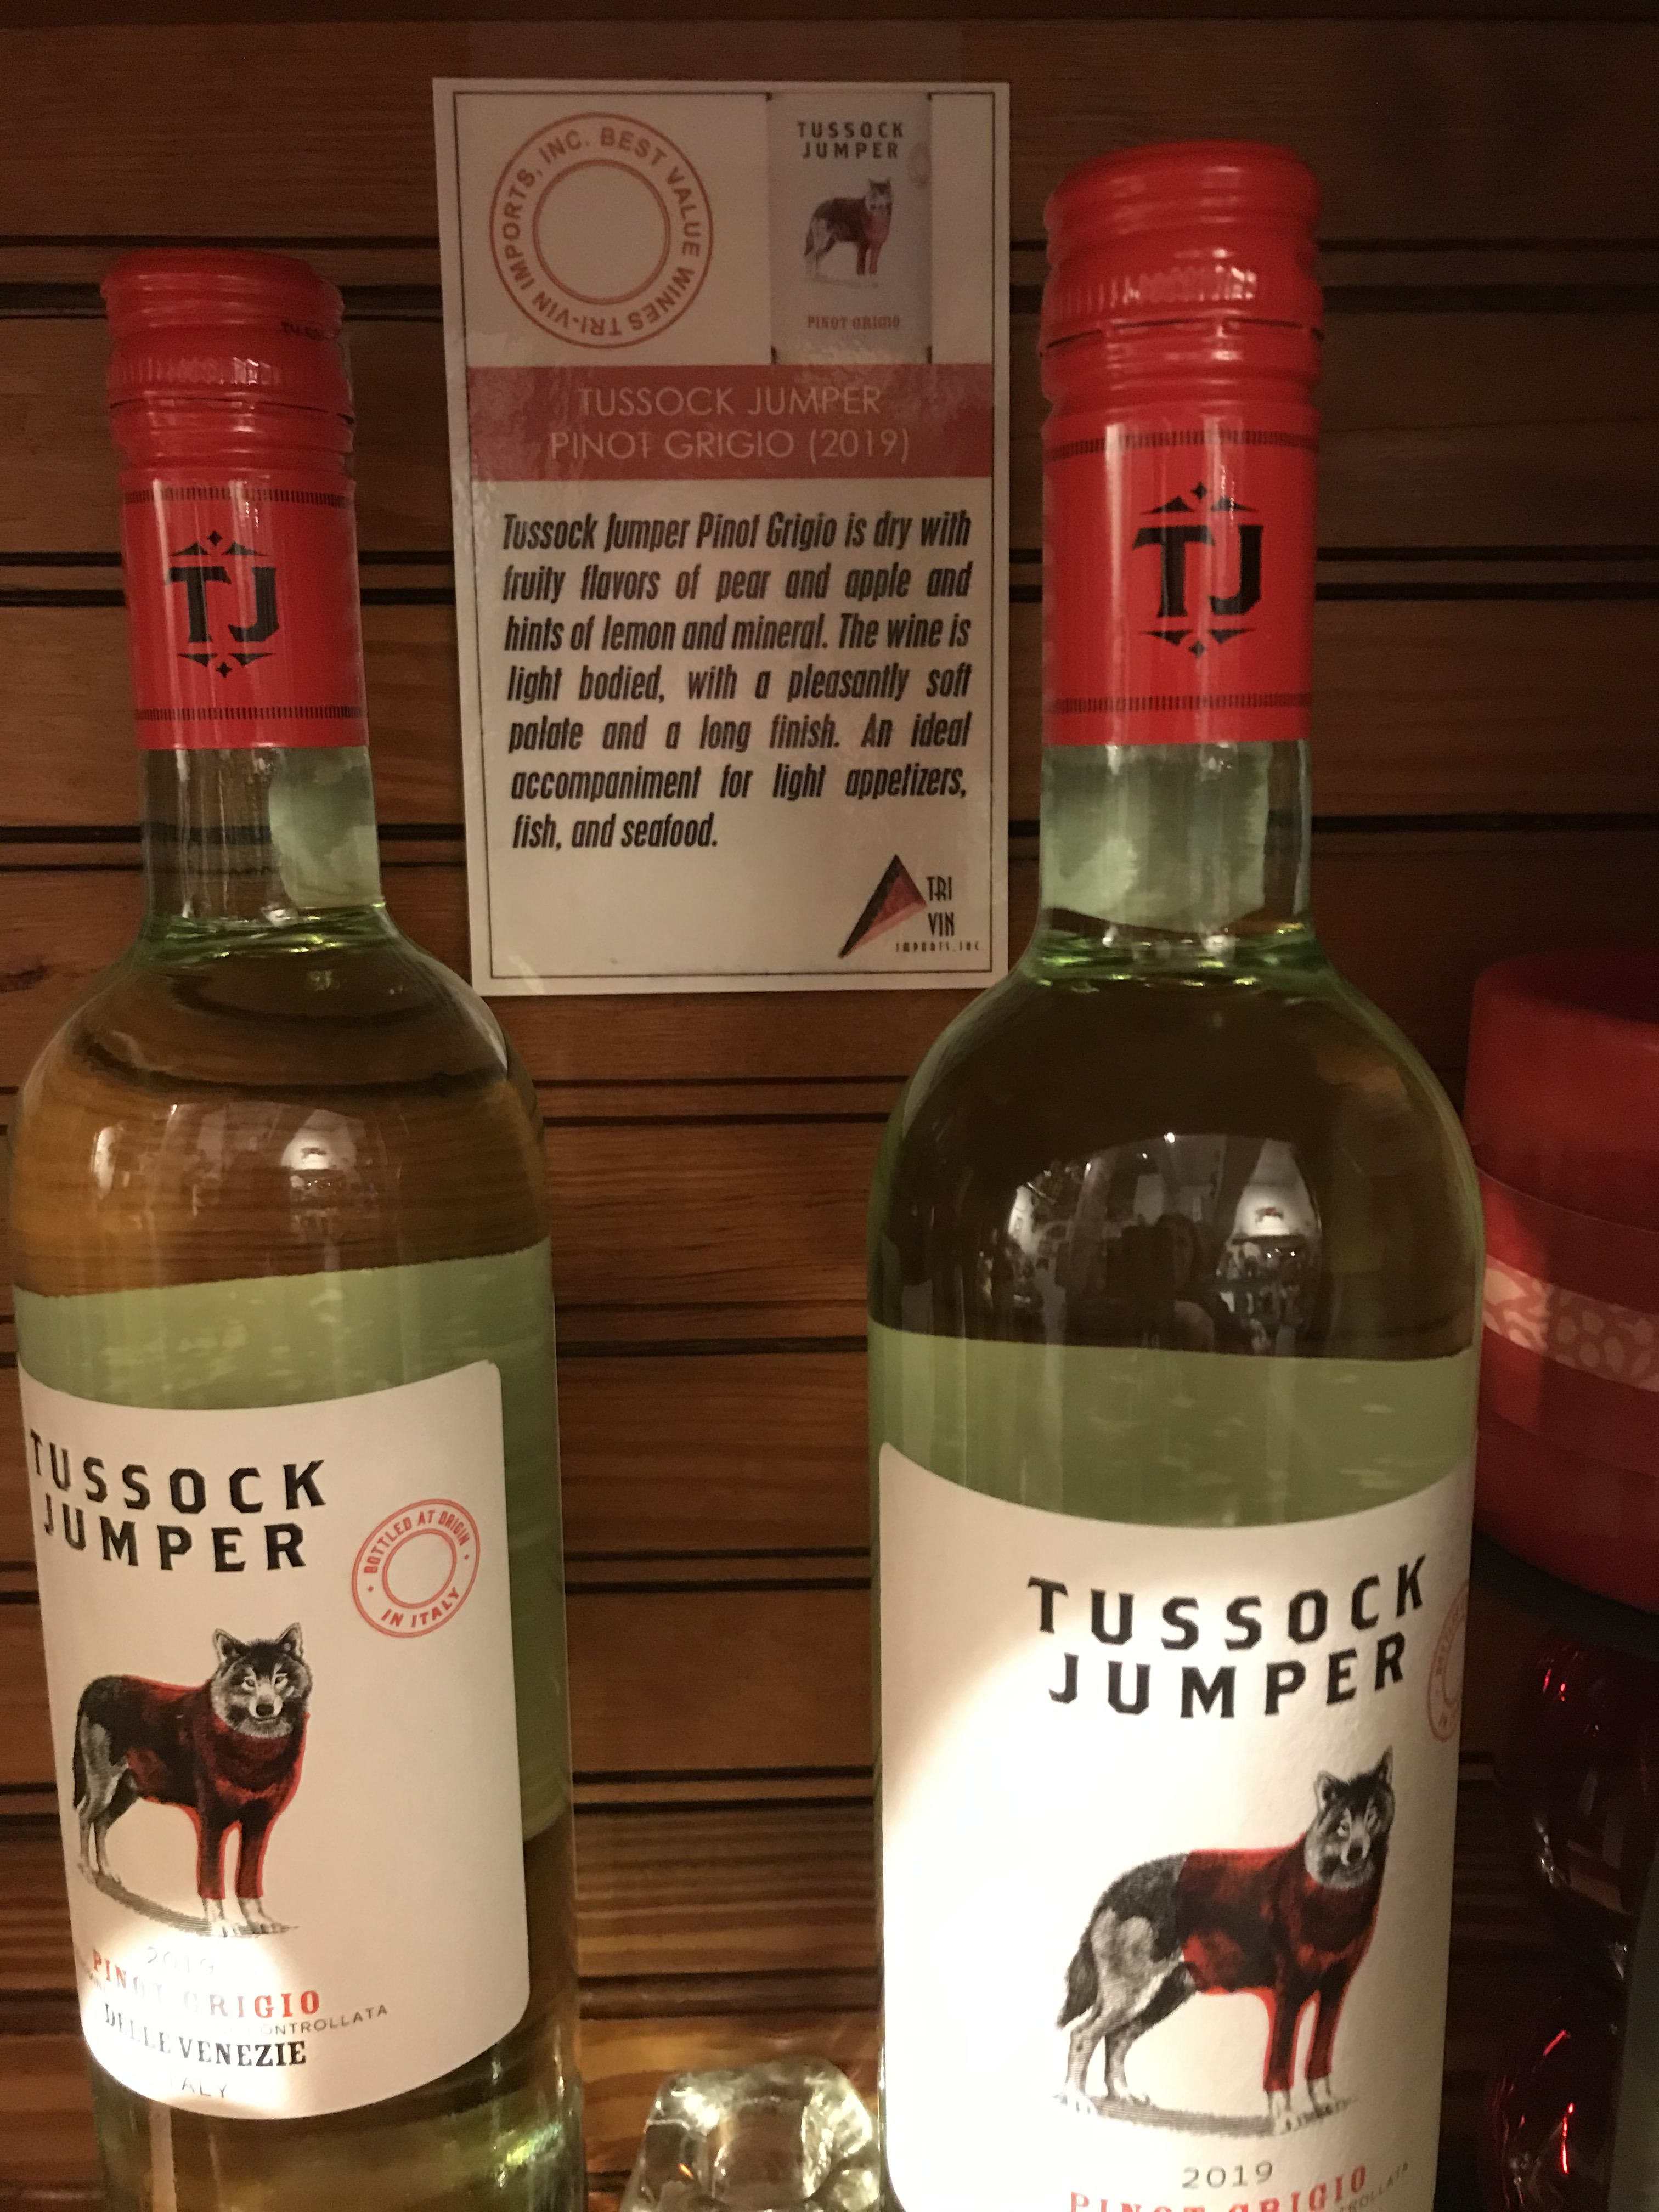  Pinot Grigio - Tussock Jumper Pinot Grigio from Italy, flavors of apple, pear and pineapple